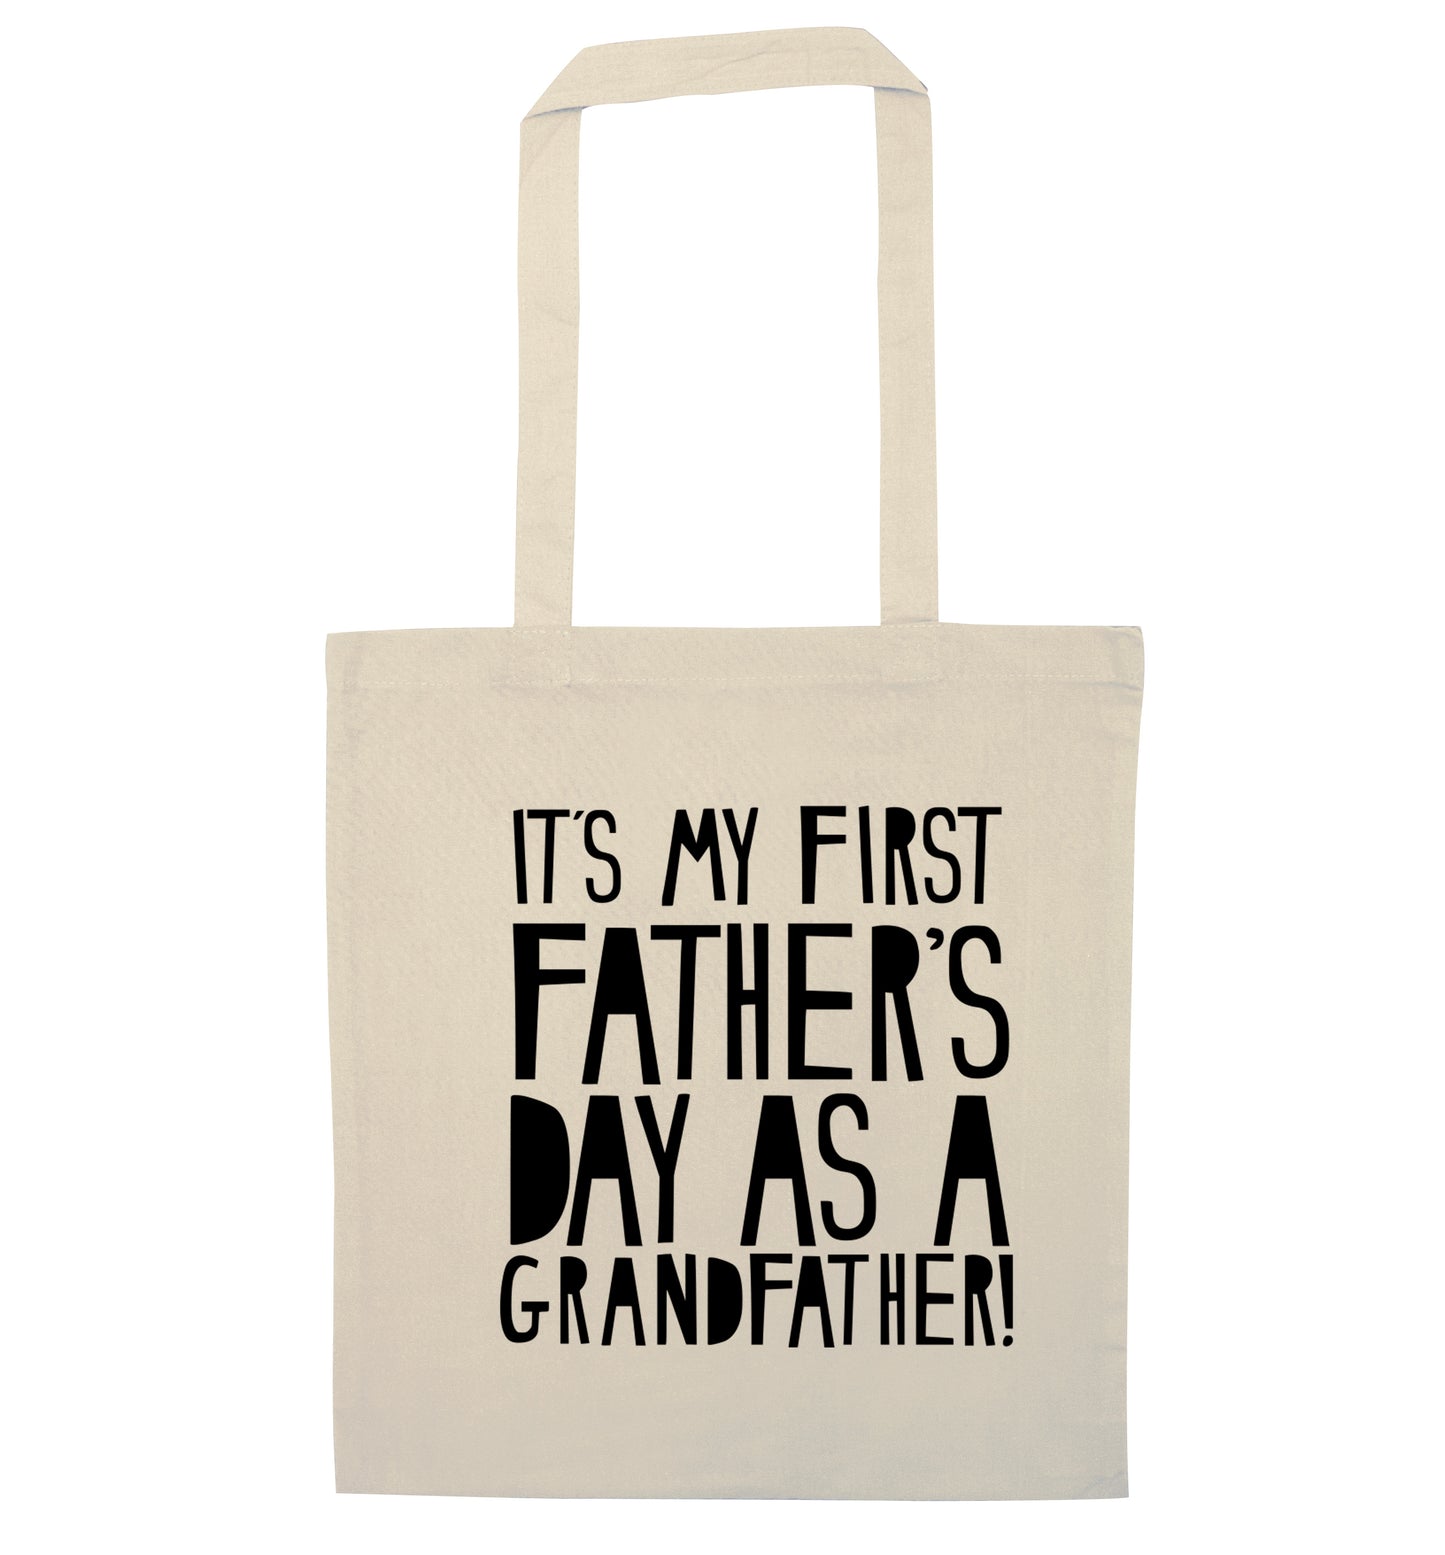 It's my first Father's Day as a Grandfather! natural tote bag